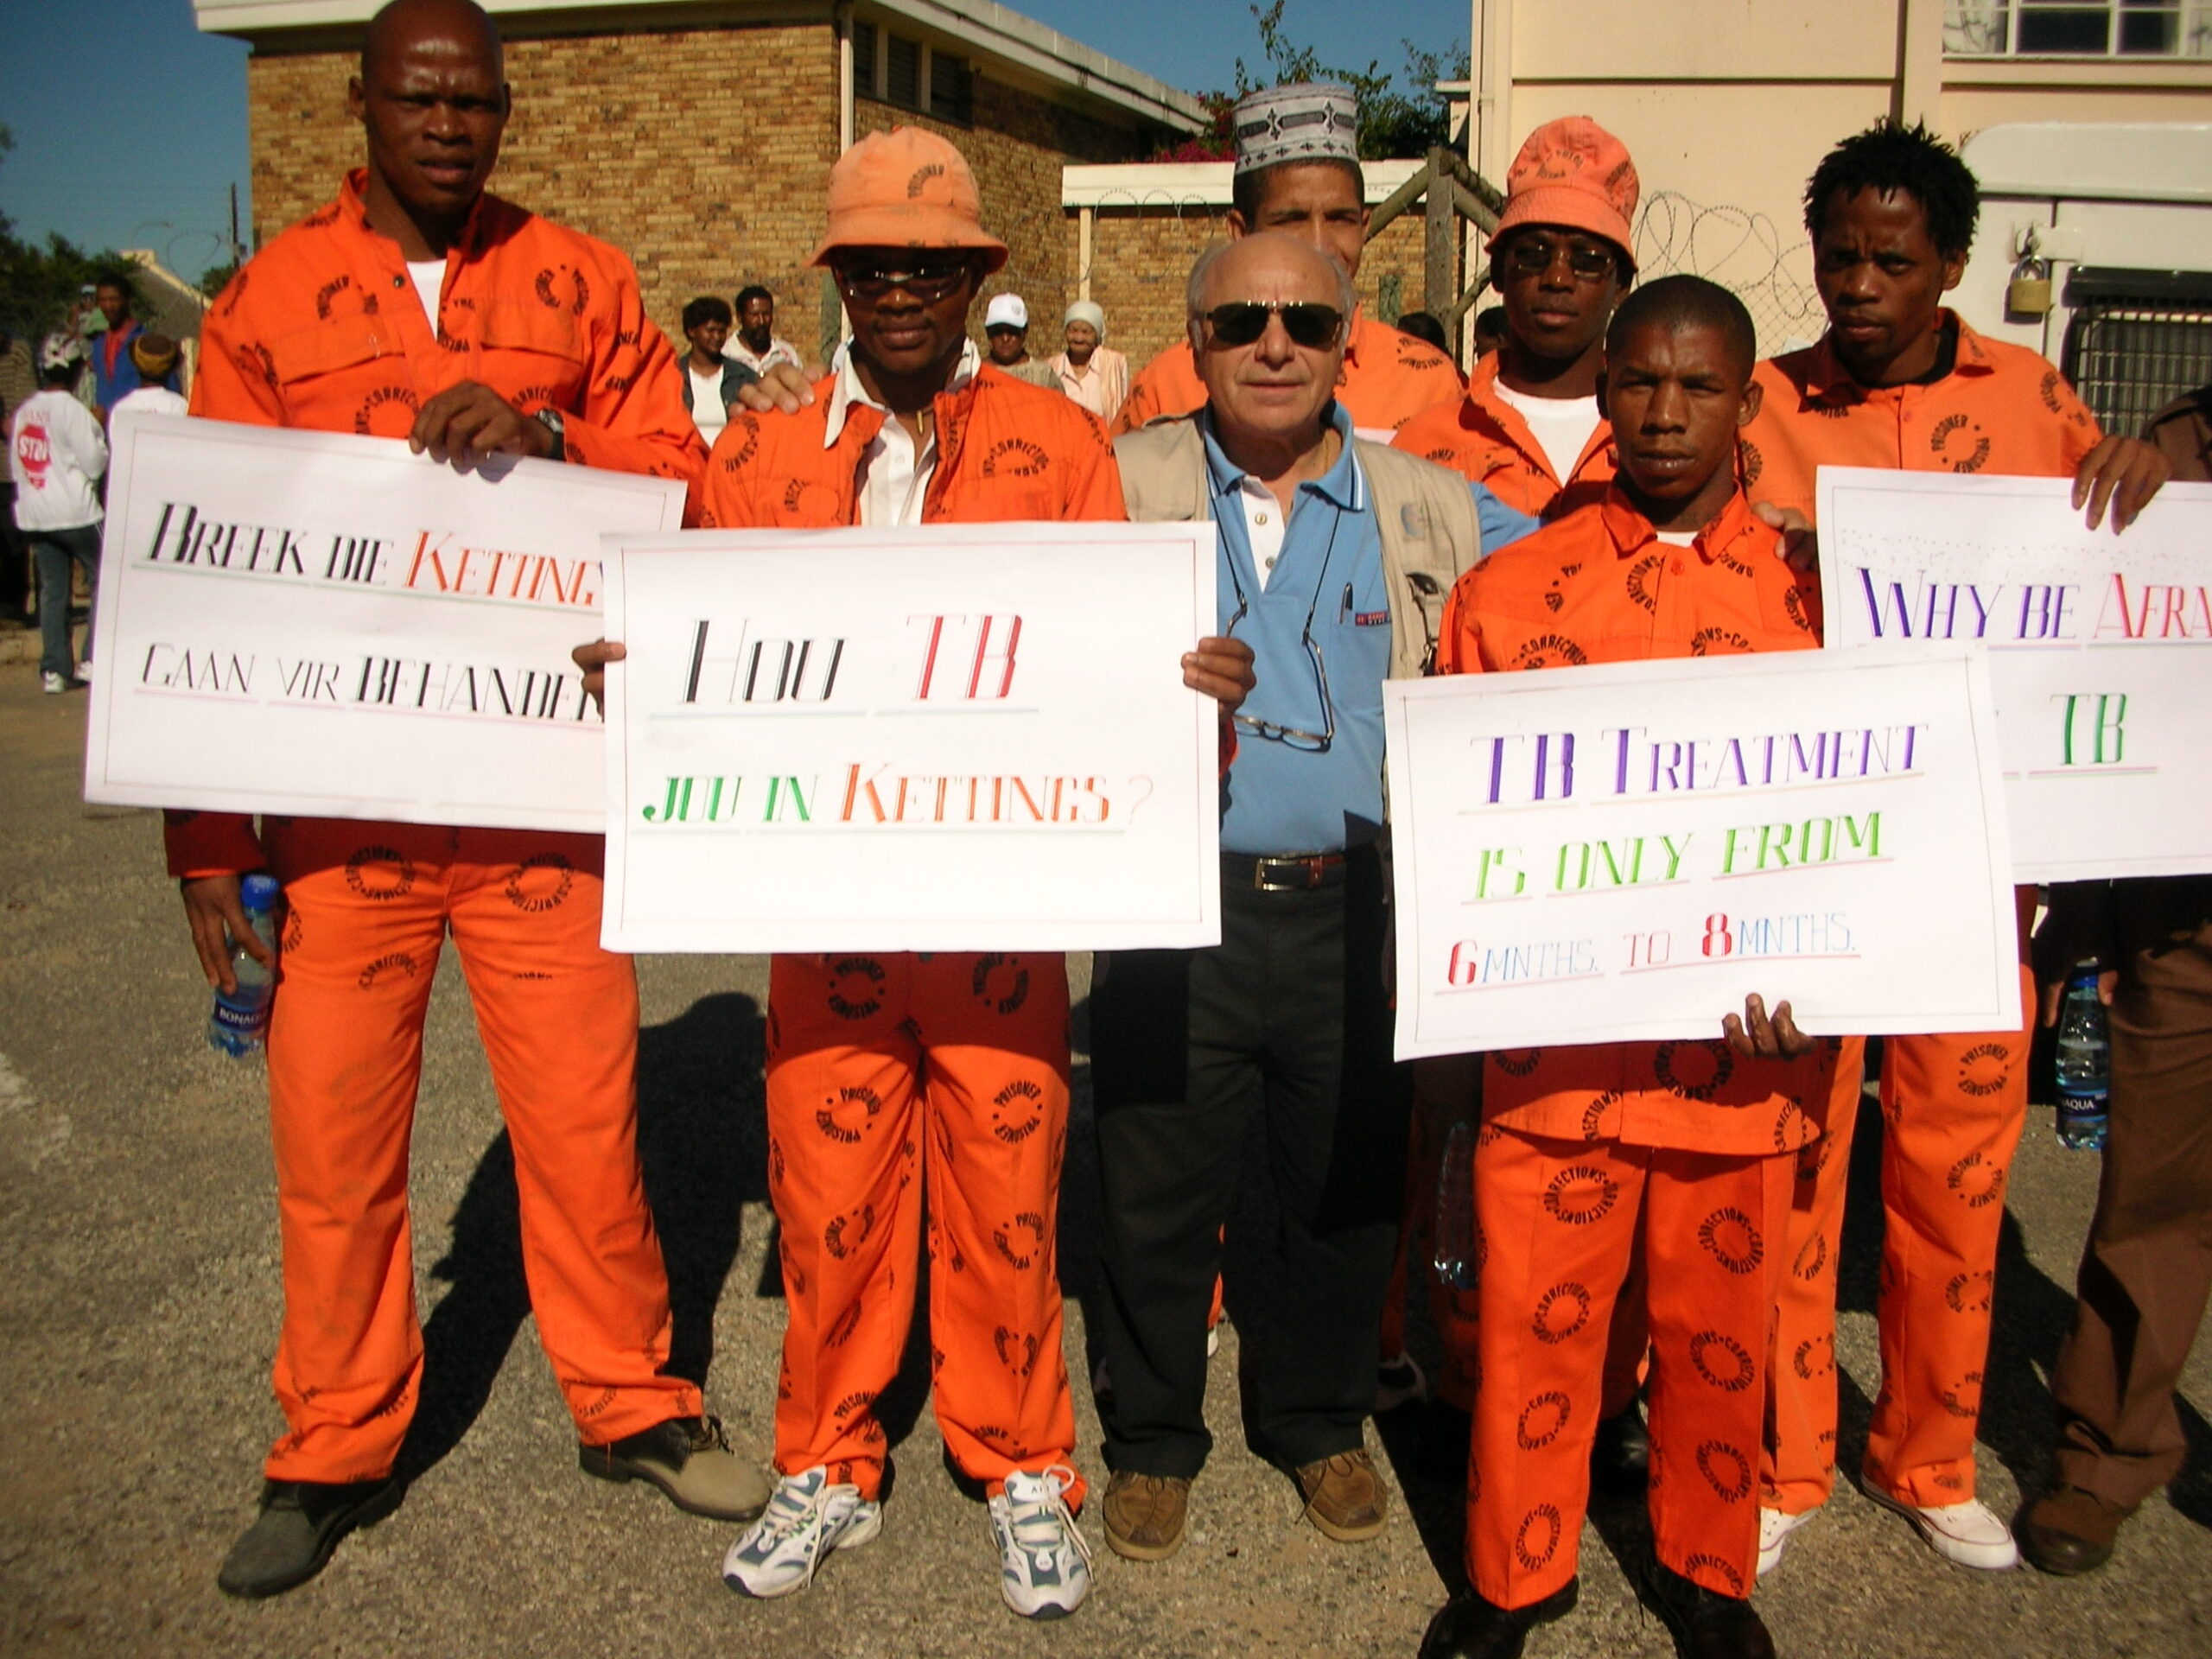 SOUTH AFRICA PRISONERS AGAINST TB